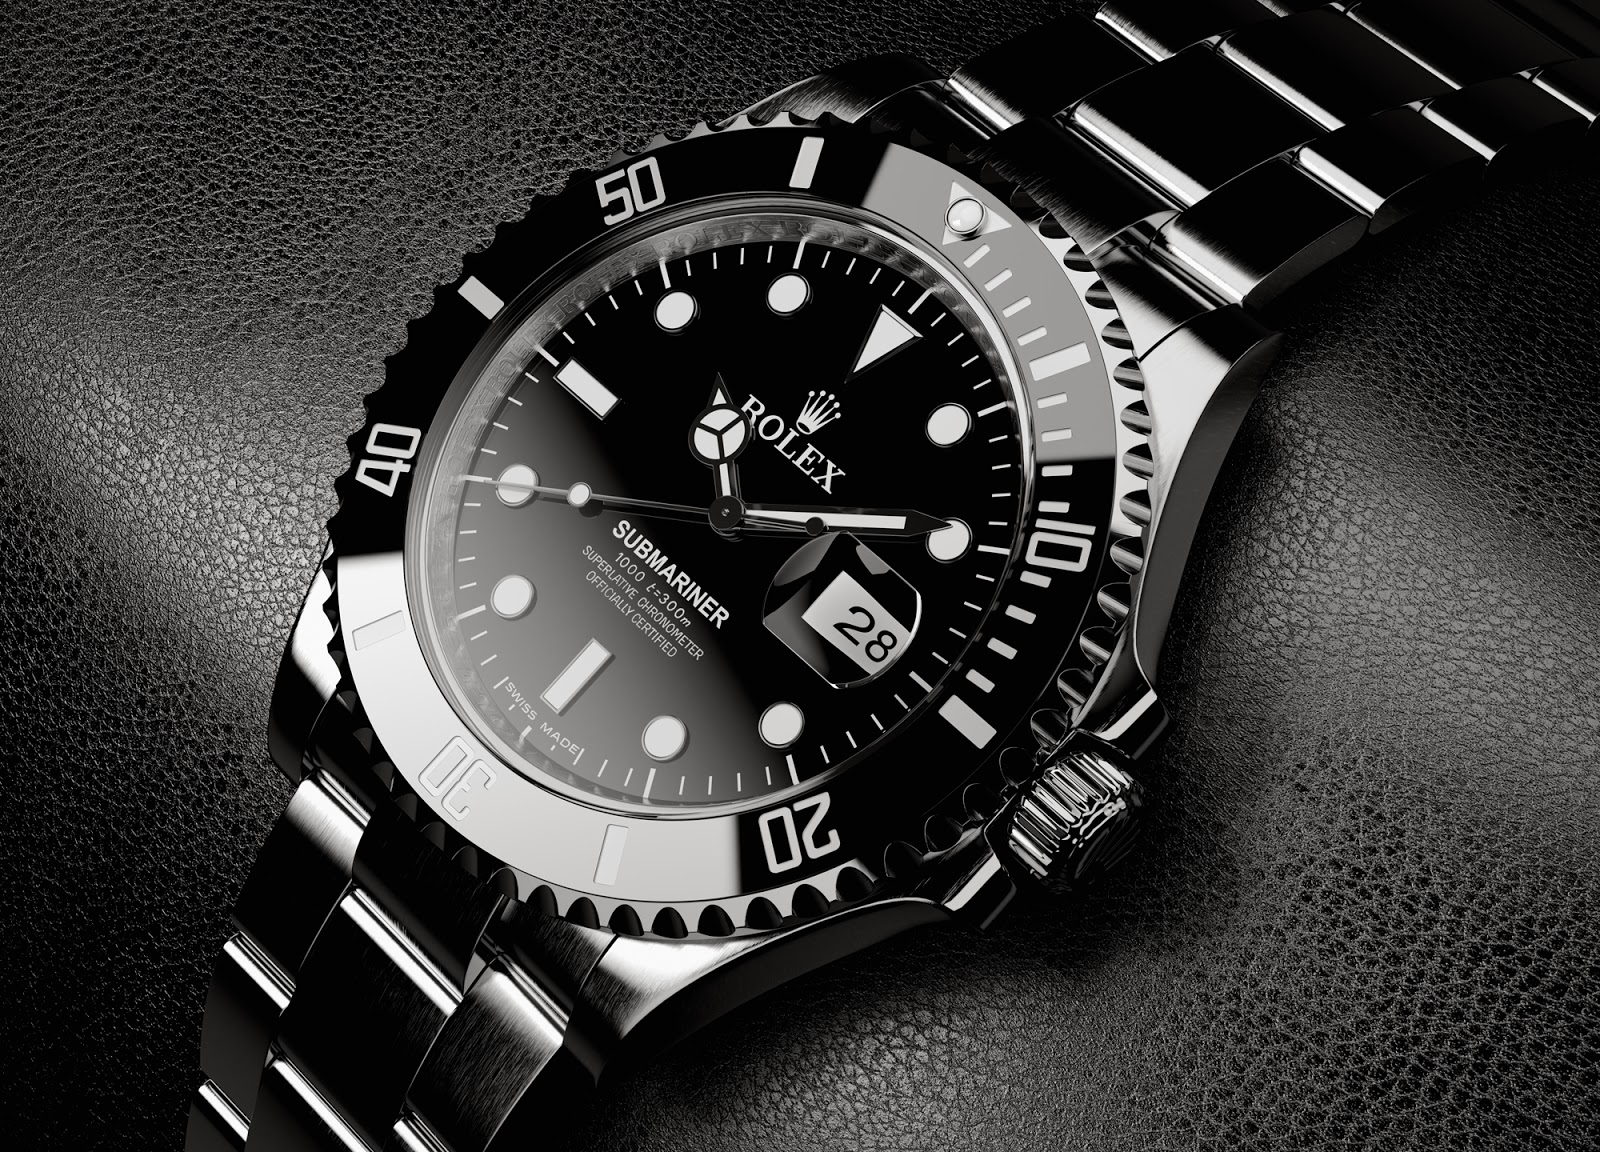 stylish watches for men and women too. Vintage Rolex watches for men ...